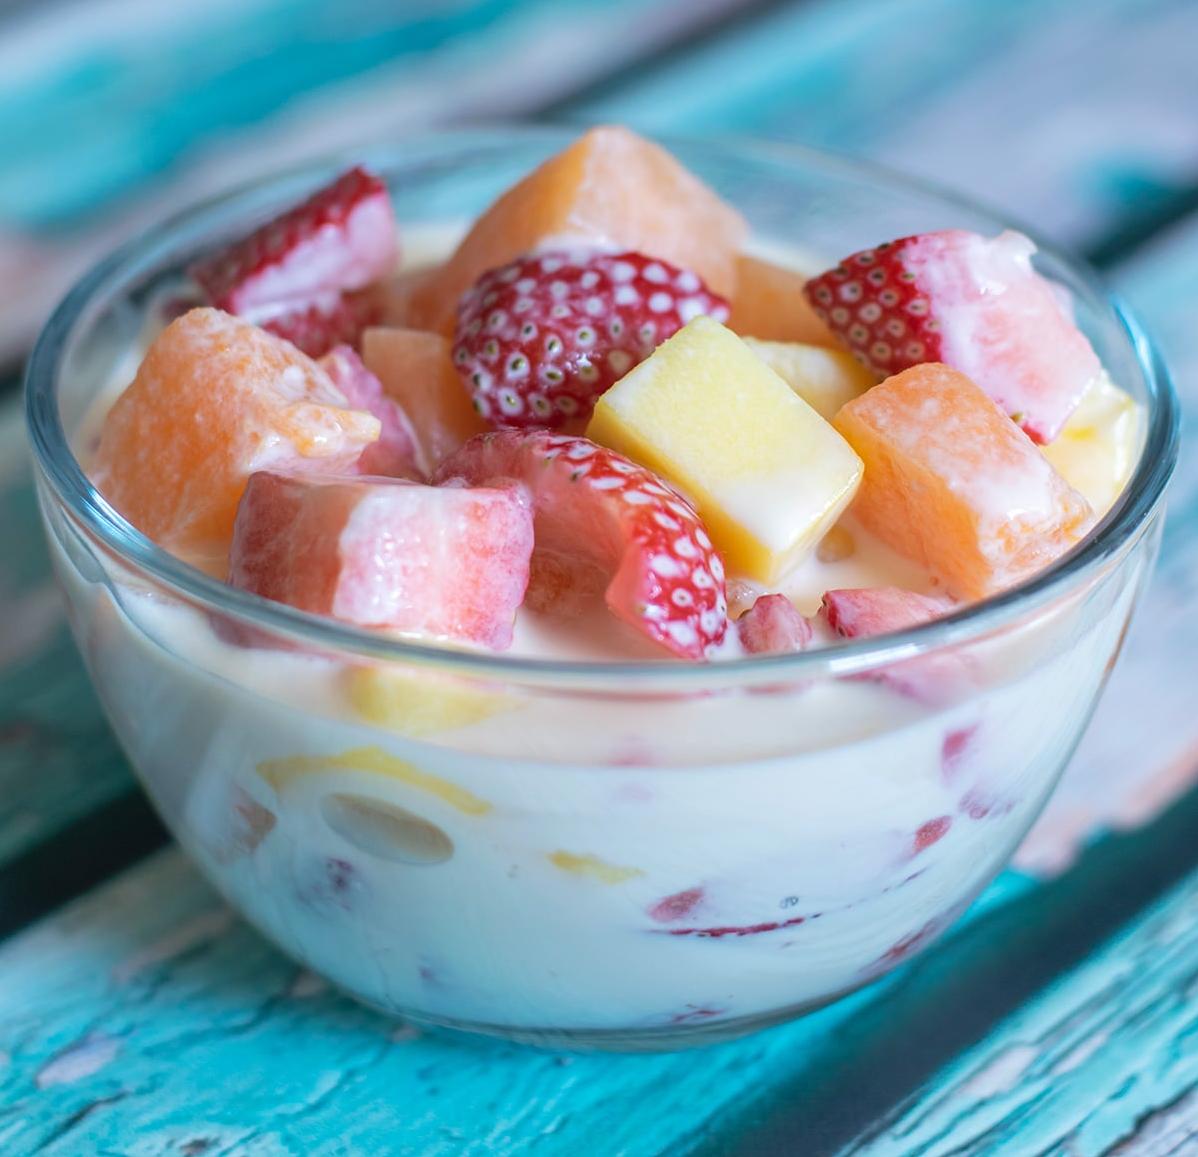  Mouthwatering fruit medley with a decadent drizzle of dulce de leche.